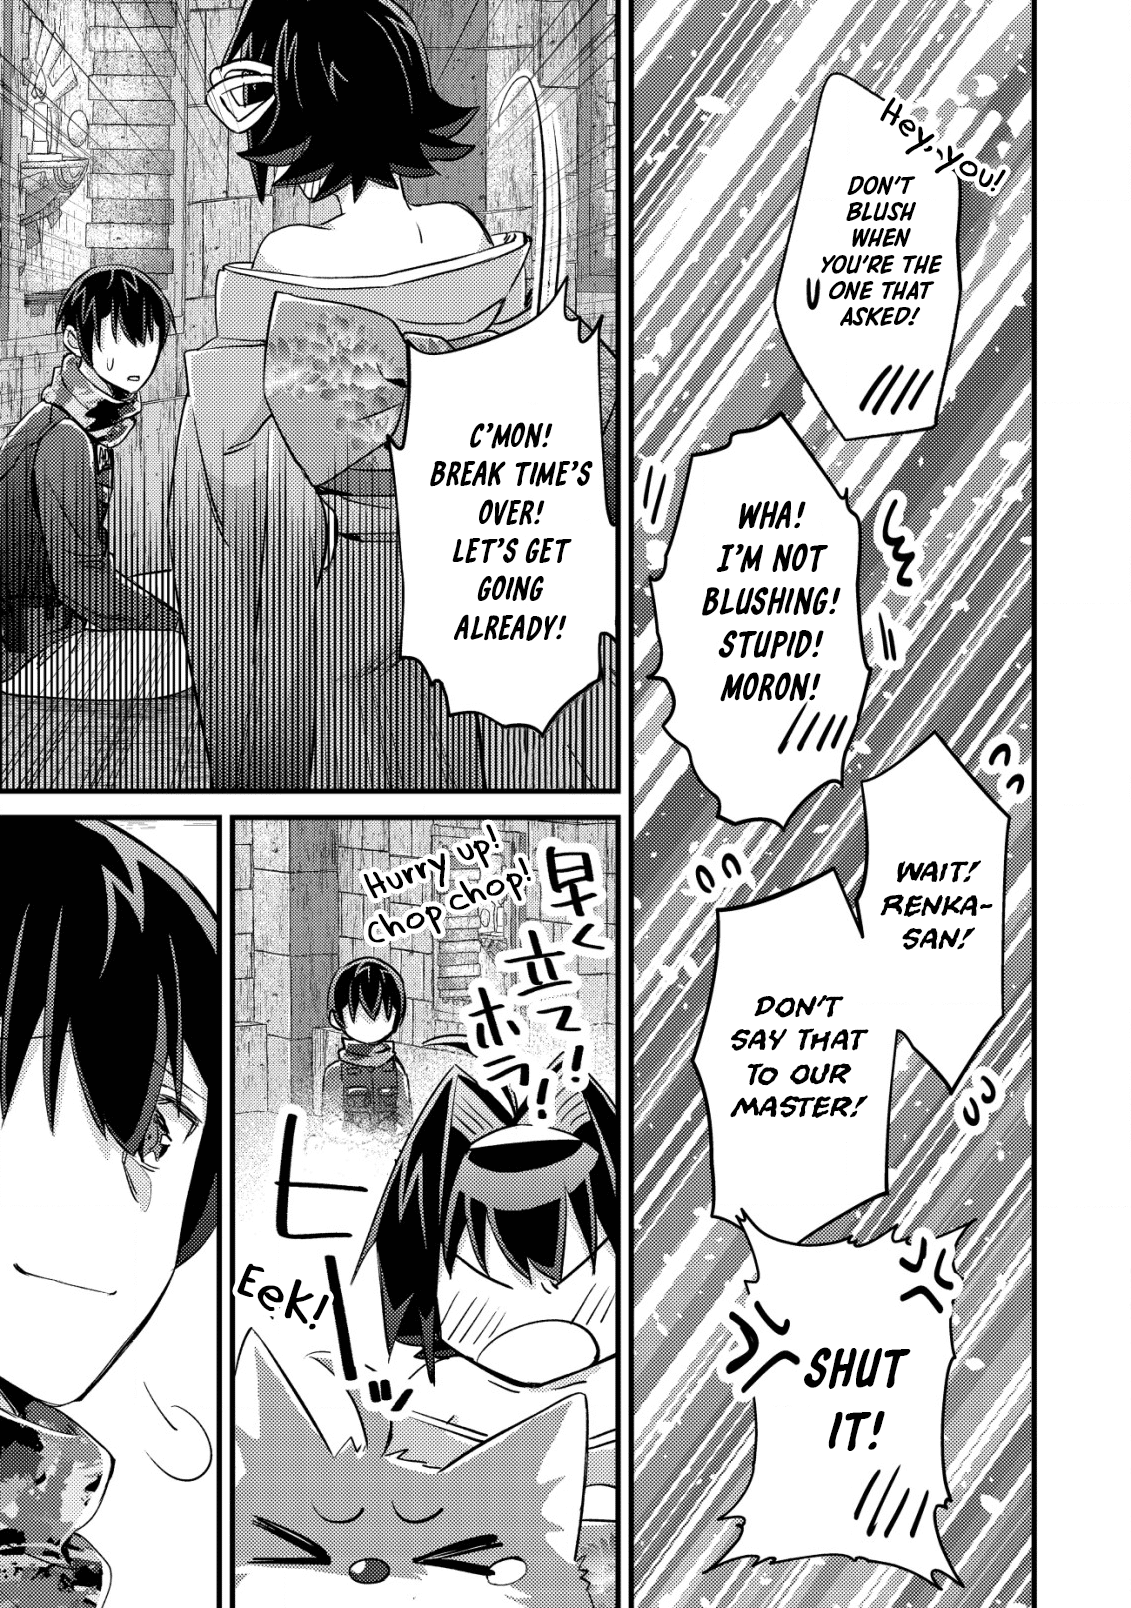 Can Even A Mob Highschooler Like Me Be A Normie If I Become An Adventurer? Vol.3 Chapter 14.2